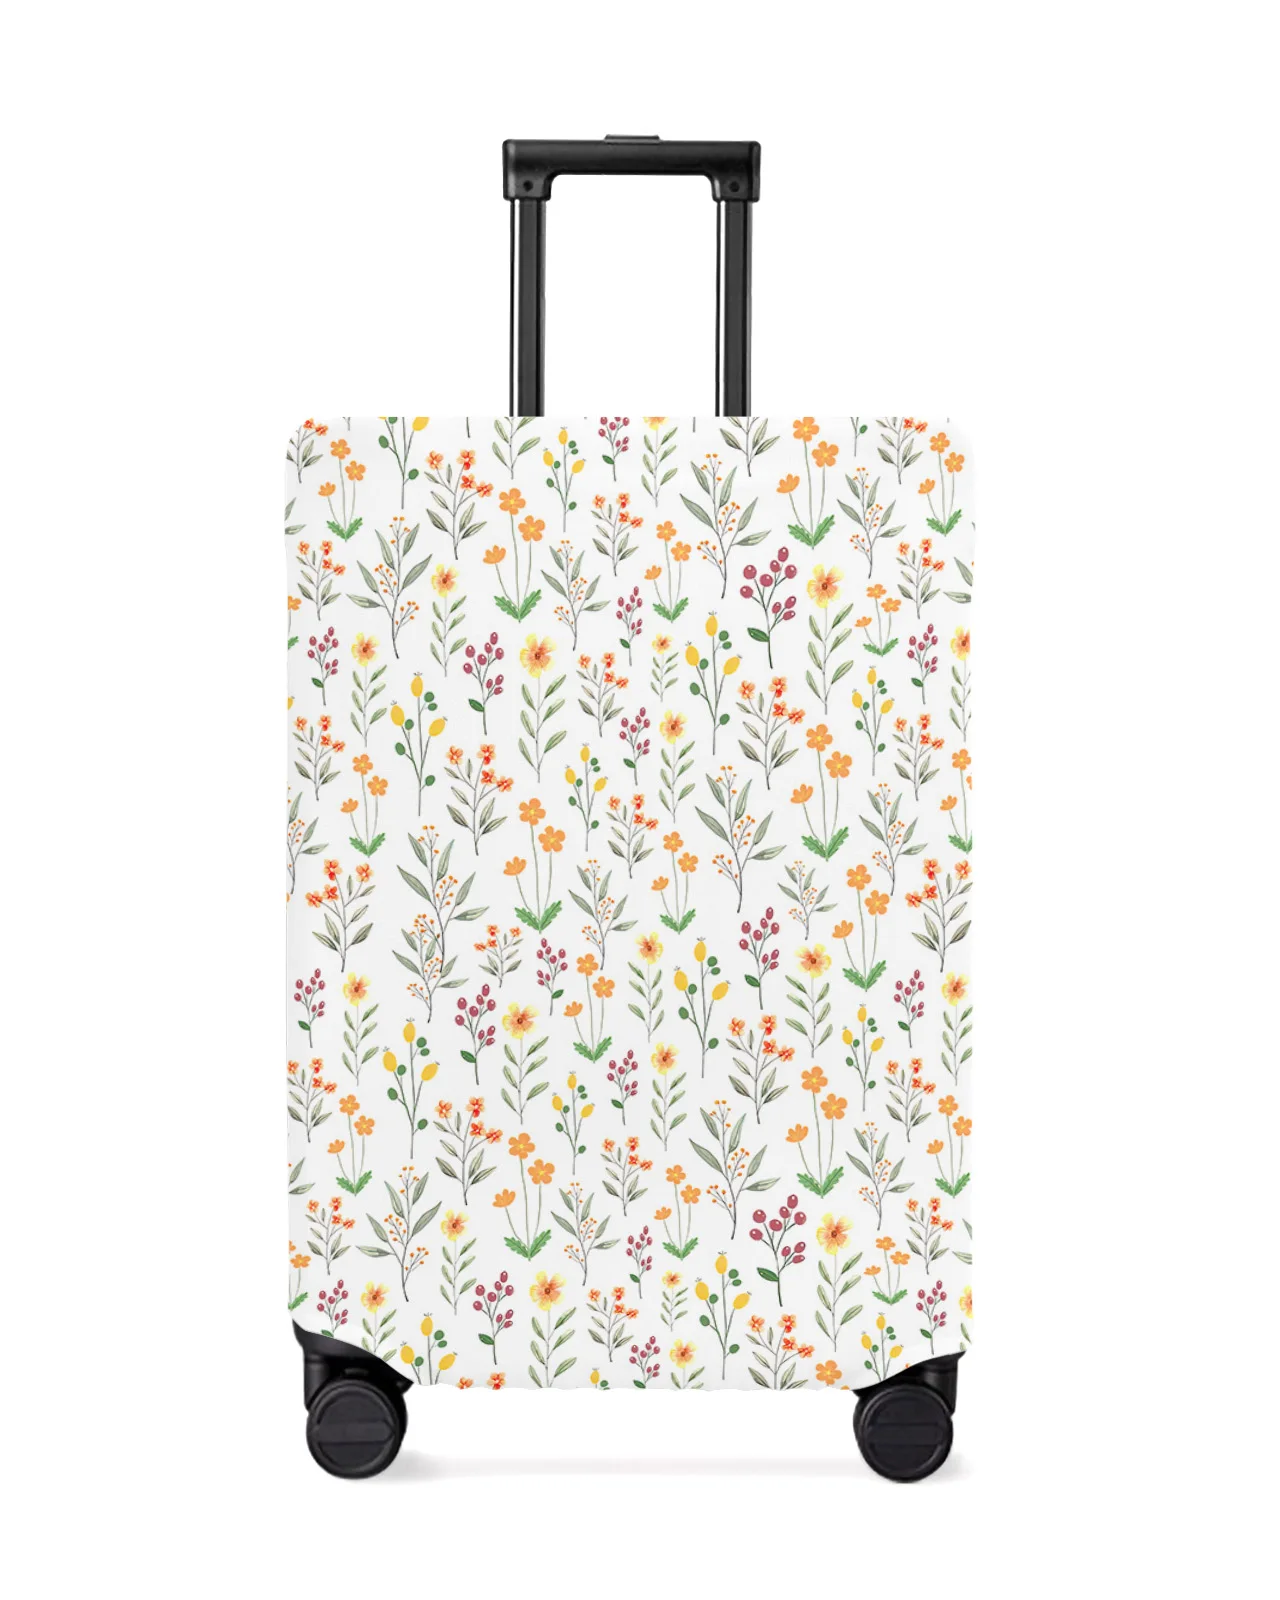 

Watercolor Flower Leaf Luggage Cover Stretch Suitcase Protector Baggage Dust Case Cover for 18-32 Inch Travel Suitcase Case